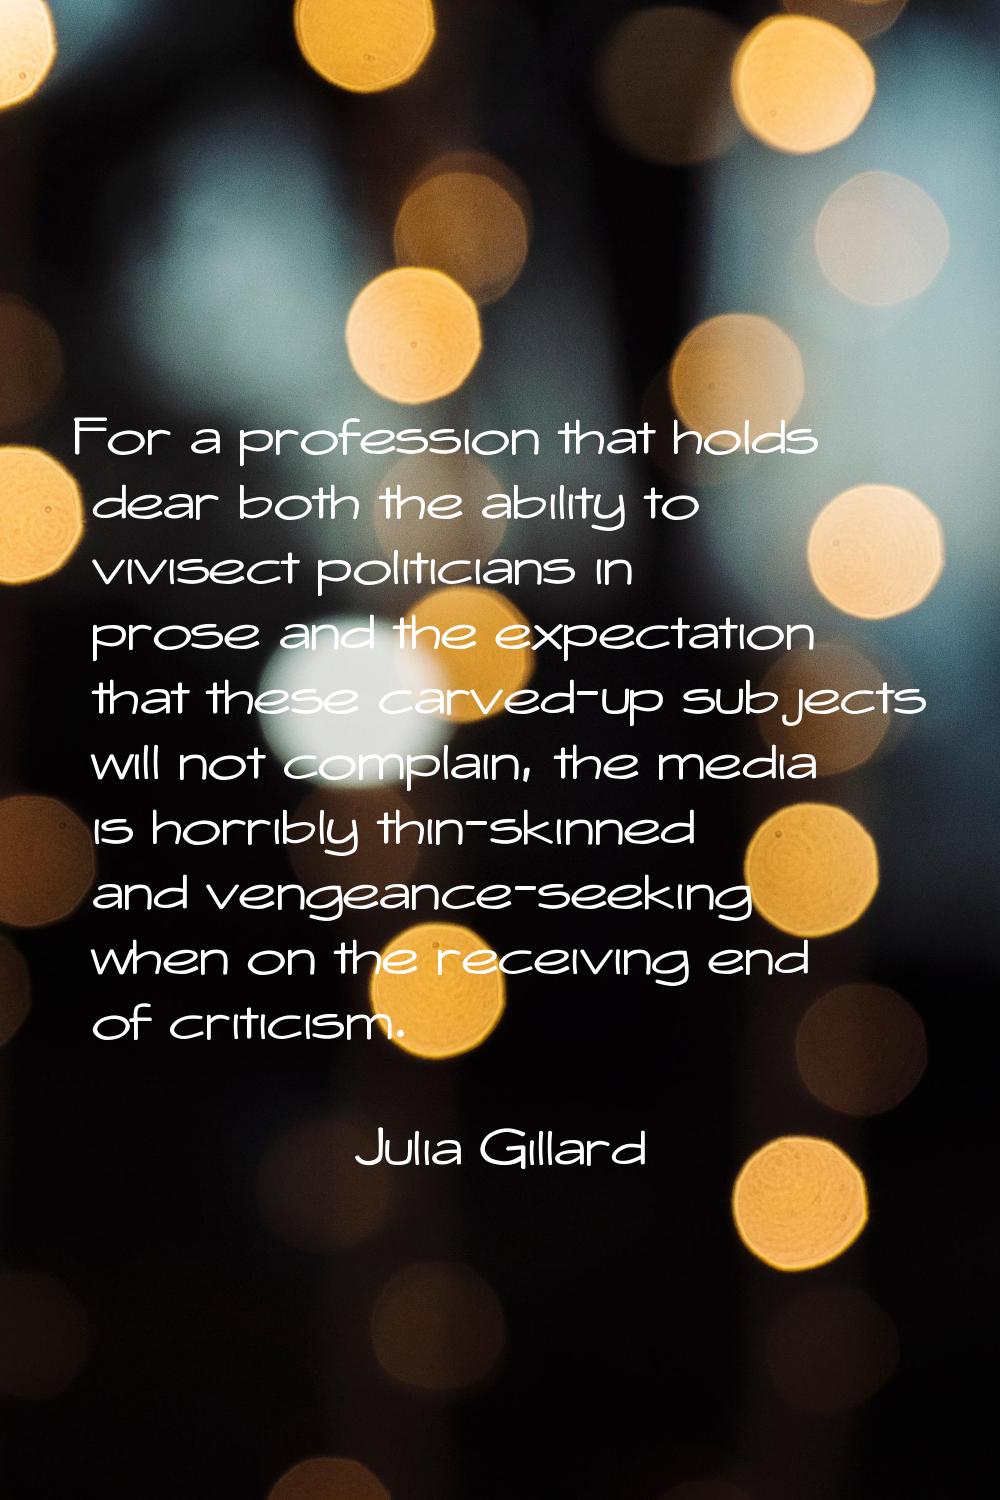 For a profession that holds dear both the ability to vivisect politicians in prose and the expectat